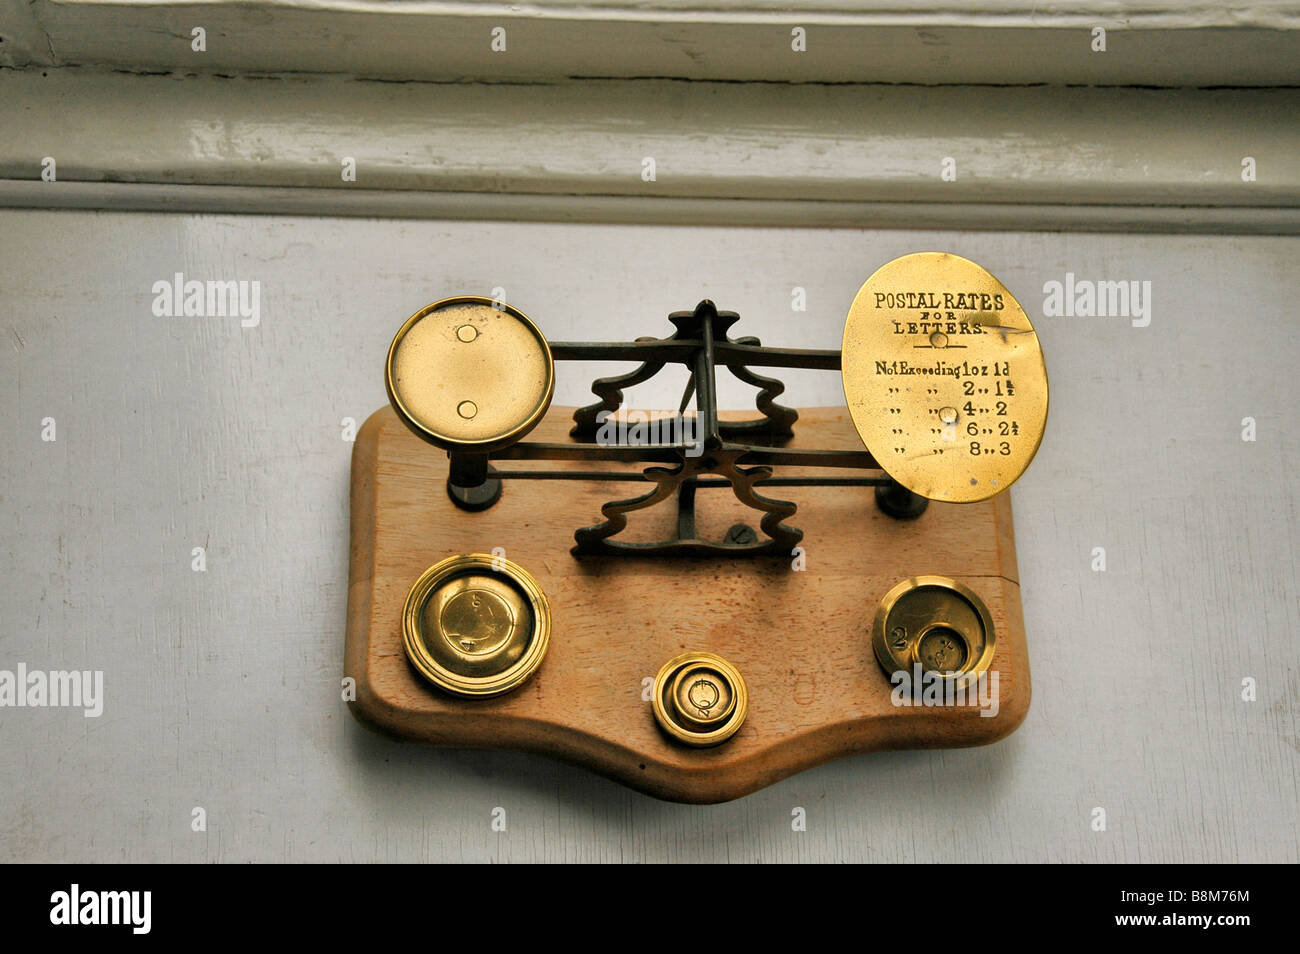 An antique post office letter weighing set of scales Stock Photo - Alamy